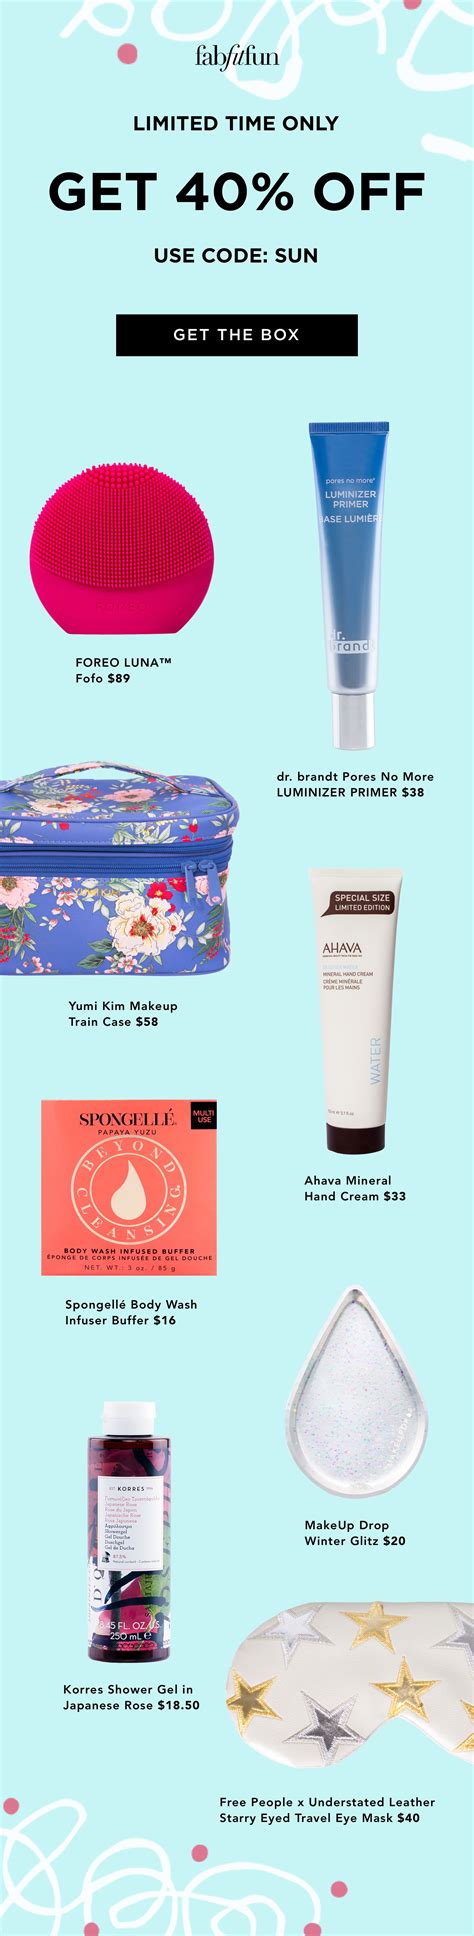 the 1 subscription box you need this year is fabfitfun get 200 of full size makeup fashion